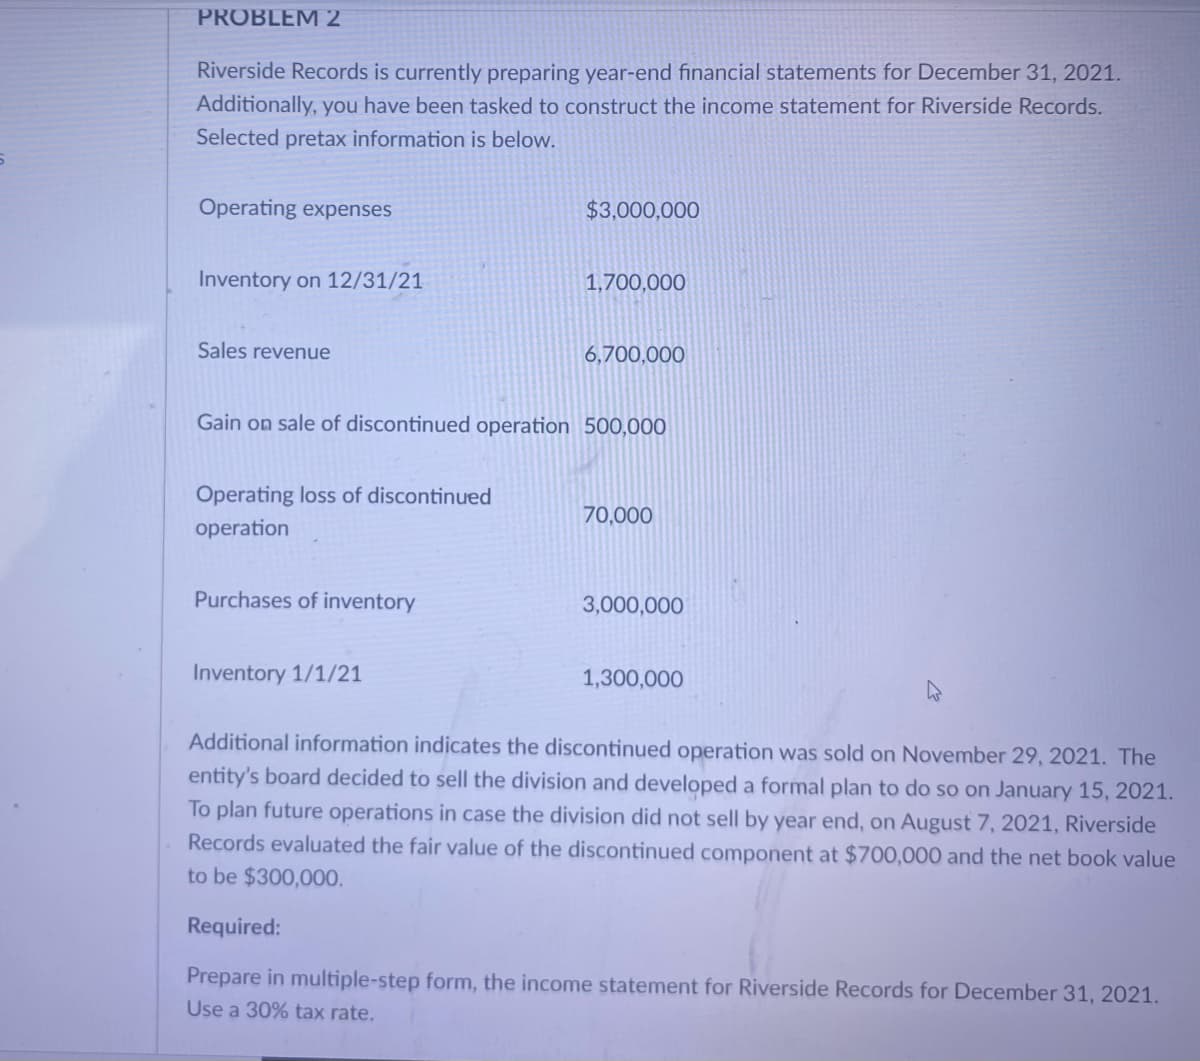 PROBLEM 2
Riverside Records is currently preparing year-end financial statements for December 31, 2021.
Additionally, you have been tasked to construct the income statement for Riverside Records.
Selected pretax information is below.
Operating expenses
$3,000,000
Inventory on 12/31/21
1,700,000
Sales revenue
6,700,000
Gain on sale of discontinued operation 500,000
Operating loss of discontinued
70,000
operation
Purchases of inventory
3,000,000
Inventory 1/1/21
1,300,000
Additional information indicates the discontinued operation was sold on November 29, 2021. The
entity's board decided to sell the division and developed a formal plan to do so on January 15, 2021.
To plan future operations in case the division did not sell by year end, on August 7, 2021, Riverside
Records evaluated the fair value of the discontinued component at $700,000 and the net book value
to be $300,000.
Required:
Prepare in multiple-step form, the income statement for Riverside Records for December 31, 2021.
Use a 30% tax rate,
